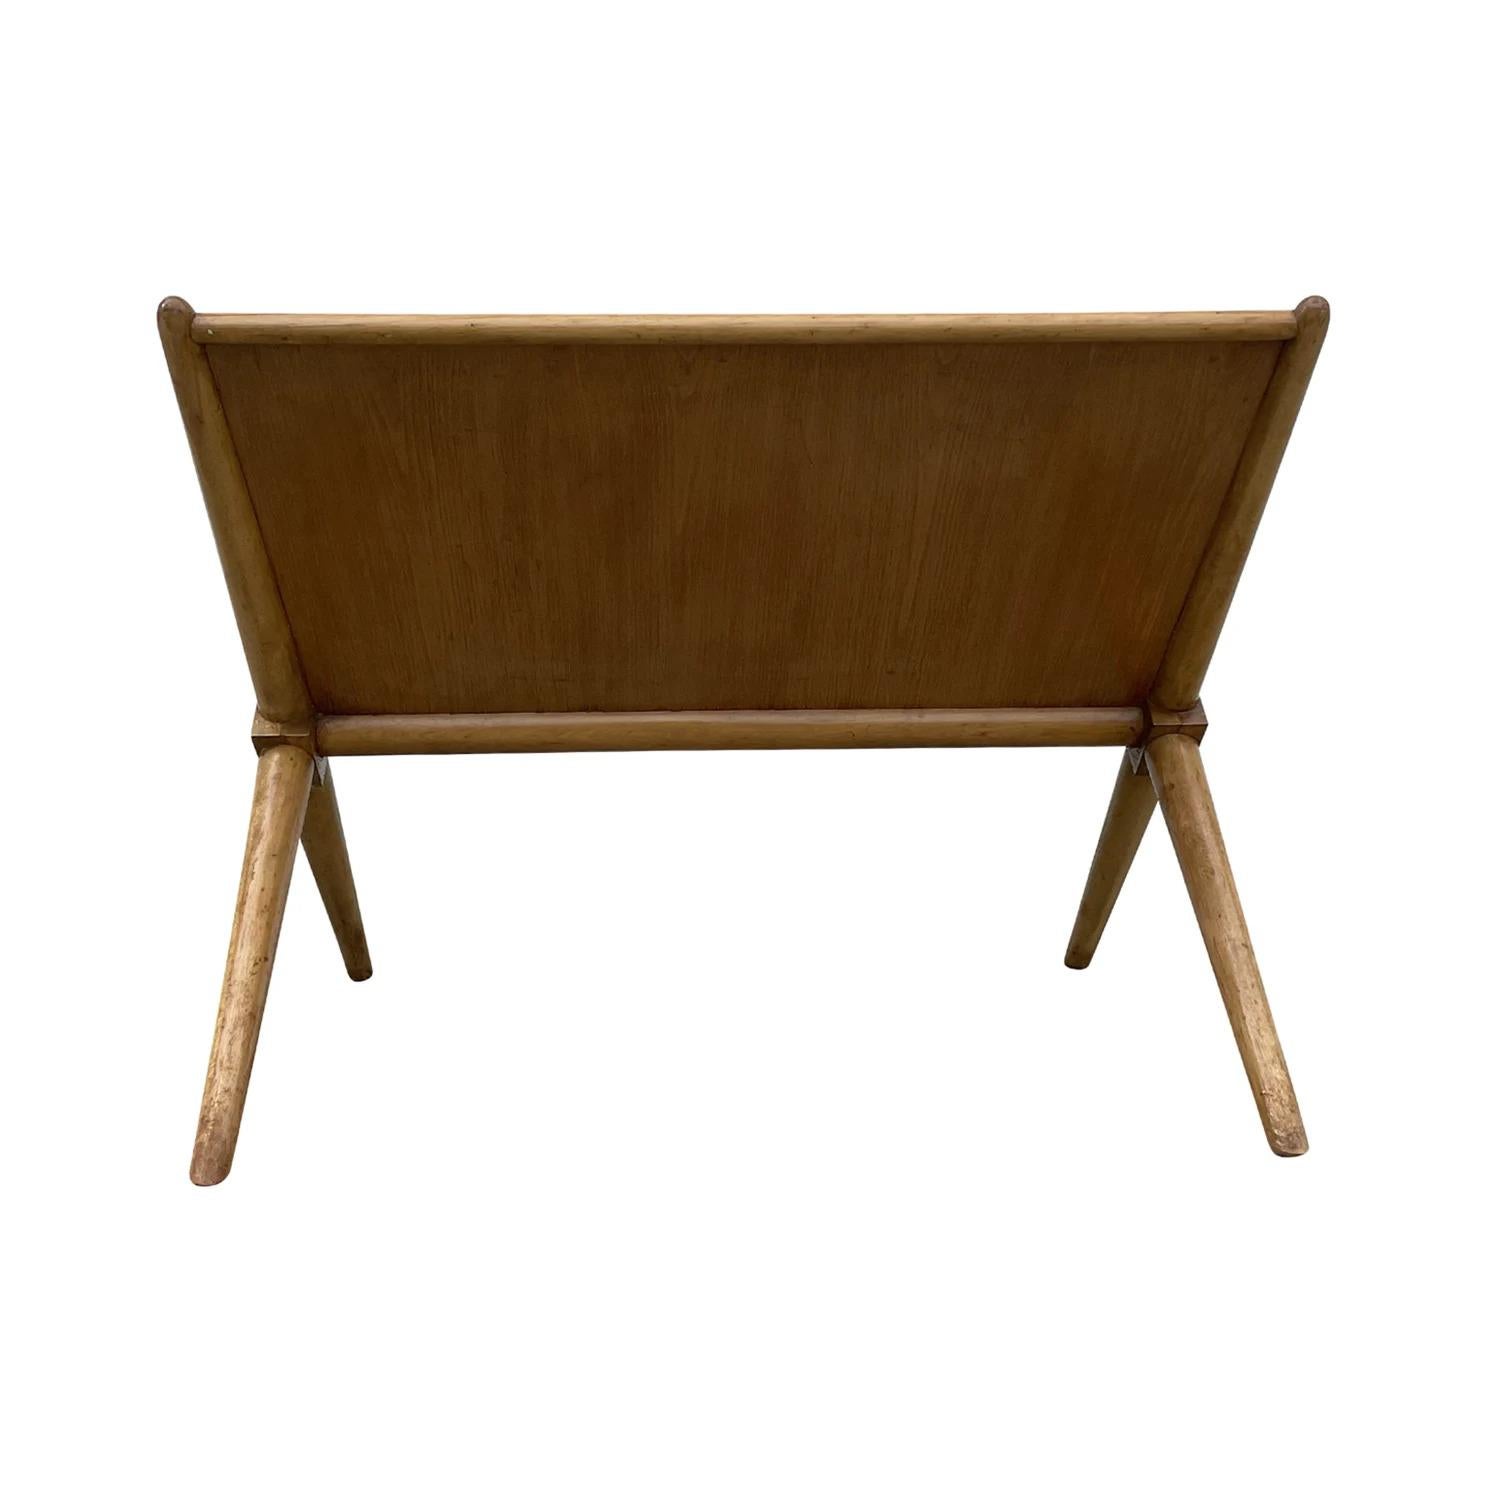 A light-brown, vintage Mid-Century Modern American X base magazine side table made of hand carved Mahogany and Birchwood, designed by Robsjohn-Gibbings and produced by Widdicomb, in good condition. The detailed end, sofa table has an arched top,